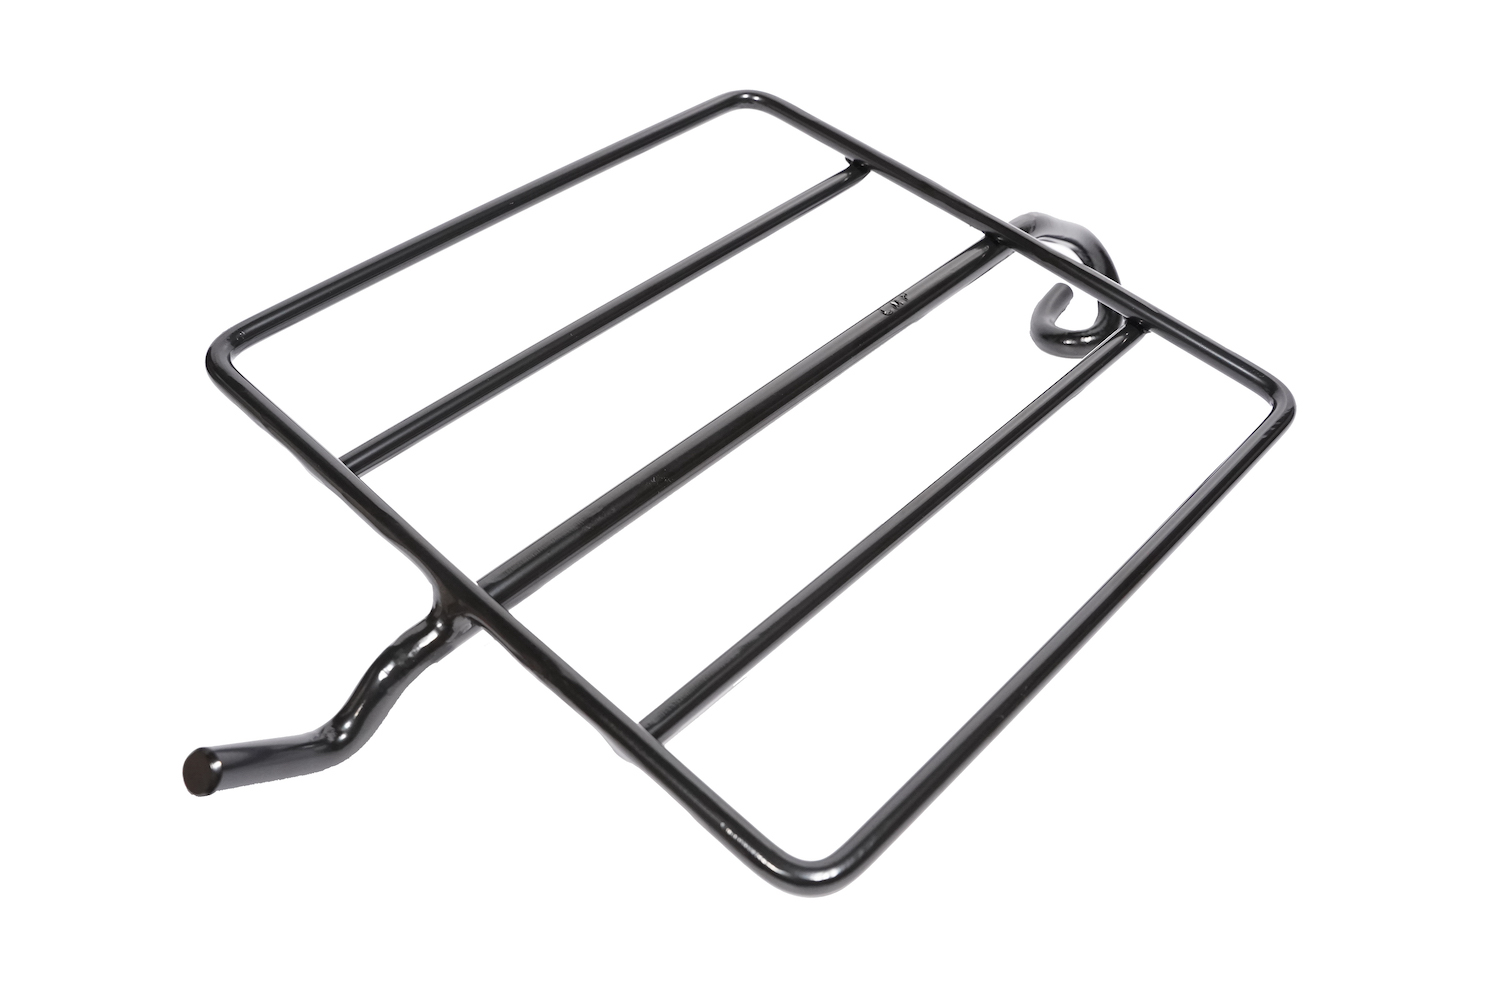 CAMP MANIA PRODUCTS / FIRE HANGER TABLE (L) 01 “compact” | CAMP 